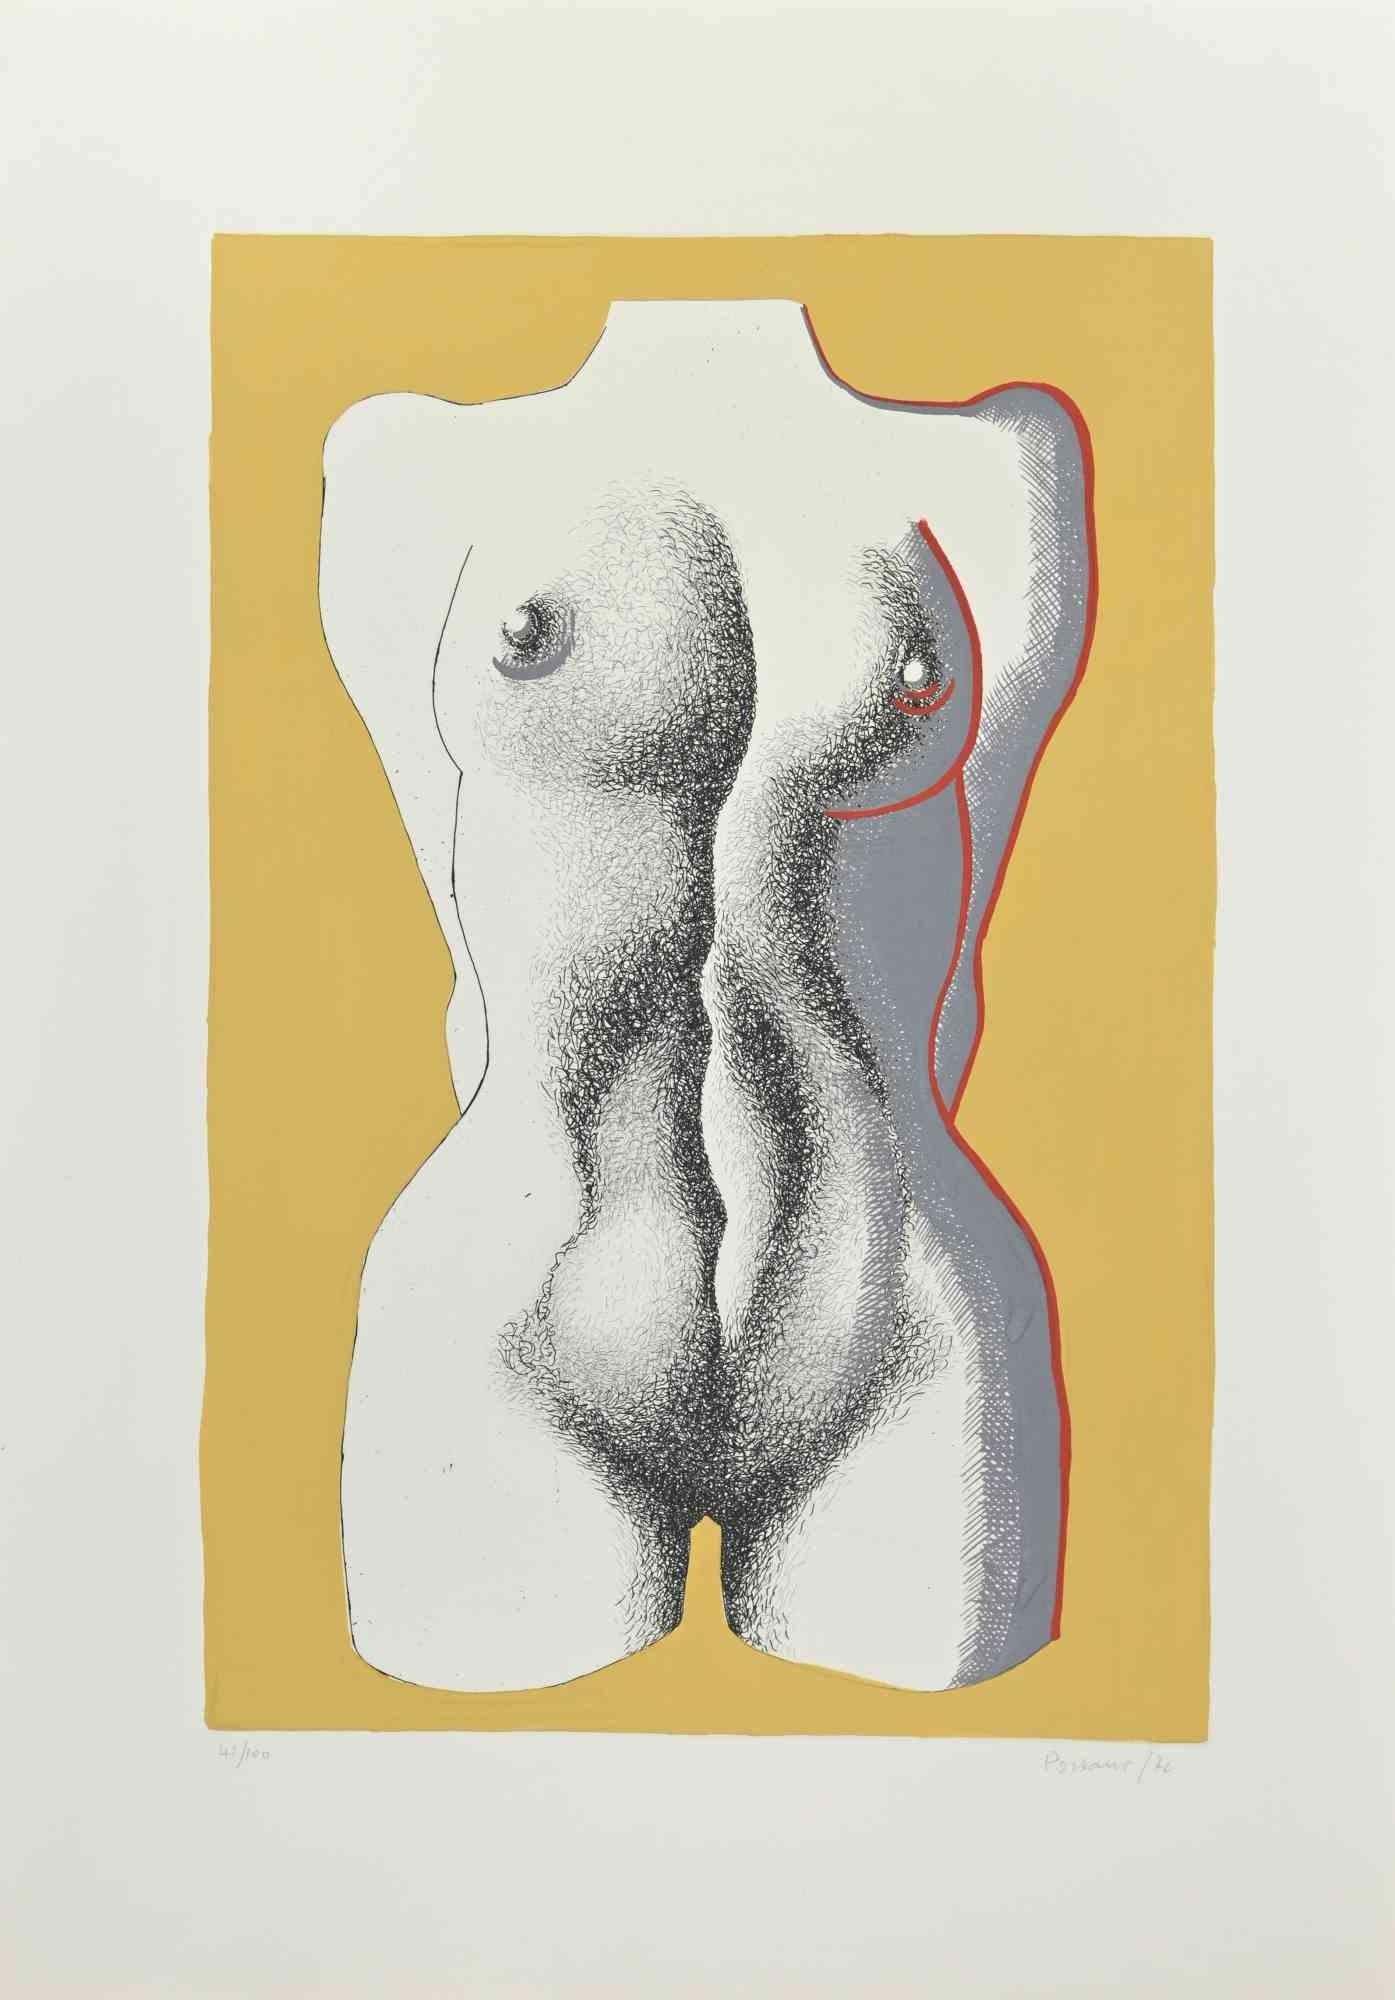 Nude is an artwork realized by the Italian artist  Giacomo Porzano (1925-2006), in 1972.

Mixed colored etching.

Hand signed and dated on the lower right margin.

Numbered on the lower left. Edition of 42/100.

Very Good condition.

This